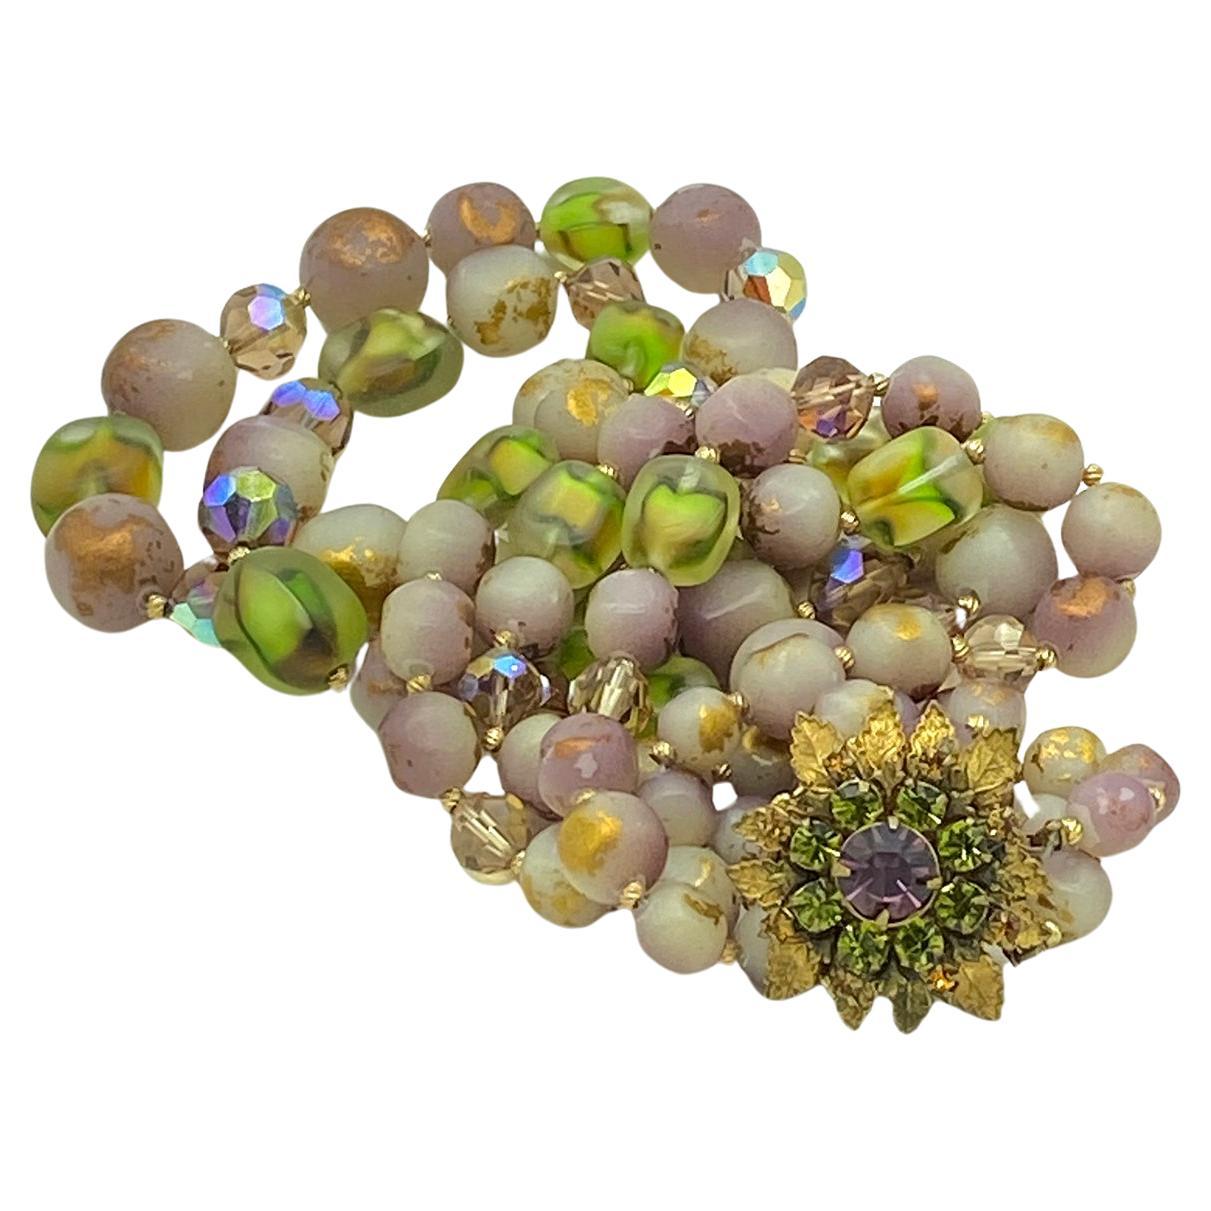 This is a Miriam Haskell double strand necklace and clip-on earrings set. They boast purple, green, gold, all the Marde Gras colors. This hand made set is hi-lighted with a rhinetone with gilded metal leaves box clasp and signed on its back. It